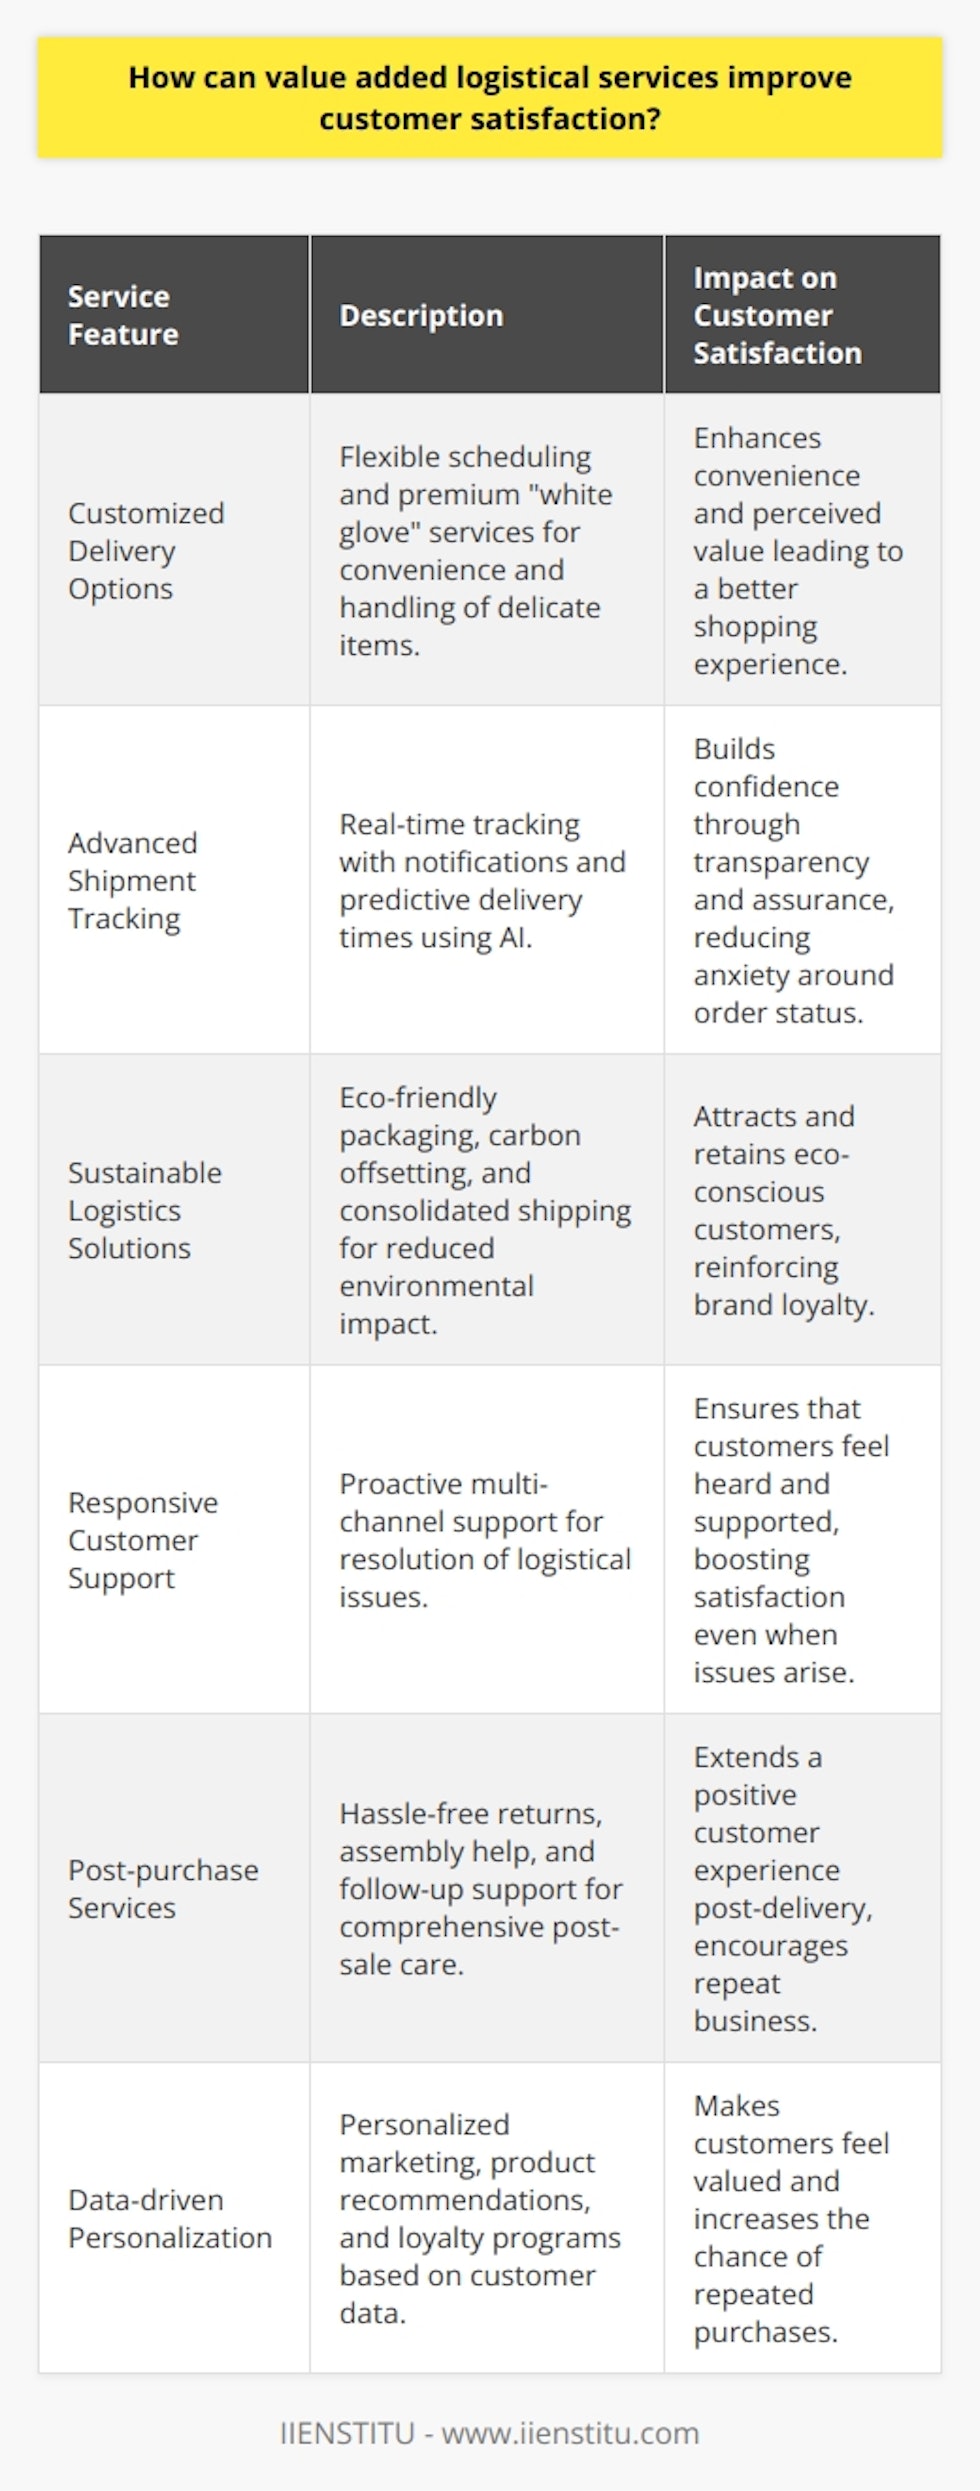 Adding value to logistical services is a strategic move that can significantly enhance customer satisfaction and set a company apart from its competition. Value-added logistical services go beyond the basic transportation and storage of goods, by providing additional benefits that meet specific customer needs and offer a more personalized experience. Implementing these services not only satisfies customers but can also lead to increased retention and brand loyalty.Customization of Delivery Options:Providing customers with various delivery options that cater to their convenience can be a game-changer. This can include scheduled delivery slots, where customers select the time and date for delivery within certain windows, ensuring receipt of their goods at the most convenient time. Moreover, offering white glove delivery services for more delicate or high-value items can add to the perceived value. This level of tailored service can drastically improve the customer's shopping experience.Advanced Shipment Tracking:Robust tracking systems that offer real-time, detailed visibility of an order's journey significantly heighten customer confidence and satisfaction. Updating customers with notifications at each stage of the delivery process – from dispatch through transit updates to final delivery confirmation – can minimize anxiety and provide assurance. Moreover, predictive tracking that provides estimated delivery times using AI and machine learning can further enrich the customer experience.Sustainable Logistics Solutions:Increasingly, customers are looking for environmentally friendly options in all aspects of purchasing, including logistics. Offering sustainable options such as eco-friendly packaging, carbon offset programs, or consolidation services that reduce shipments' environmental impact can resonate with eco-conscious customers, making them more satisfied and likely to remain loyal to a brand.Responsive Customer Support:Logistical issues can be inevitable, but the way a company responds to them can either boost or damage customer satisfaction. Providing proactive, empathetic, and solution-oriented customer support – through multiple channels including phone, email, chat, and social media – ensures that, even when issues arise, the customer feels heard and taken care of.Post-purchase Services:The customer experience doesn’t end at delivery. Post-purchase services such as hassle-free returns, assembly assistance for complex products, or follow-up support to ensure satisfaction can make a profound impact. Additionally, offering warranty management, product repair and maintenance, and reverse logistics can significantly enhance the overall value proposition and foster long-term customer relationships.Leveraging Data for Personalization:By utilizing data analytics, companies can offer highly personalized post-purchase marketing efforts, such as product recommendations, tailored discounts, and loyalty programs which can make customers feel valued and increase both satisfaction and the likelihood of repeat business.In conclusion, utilizing value-added logistical services is a multifaceted strategy that requires thoughtful implementation. It’s not simply about faster delivery but encompasses a spectrum of enhancements that make the logistical experience seamless, personal, and satisfying for the customer. IIENSTITU, with its focus on continuing education and development, can provide training and insights into the best practices for implementing these value-added services effectively. By doing so, companies can not just meet, but exceed customer expectations, fostering loyalty and driving growth.